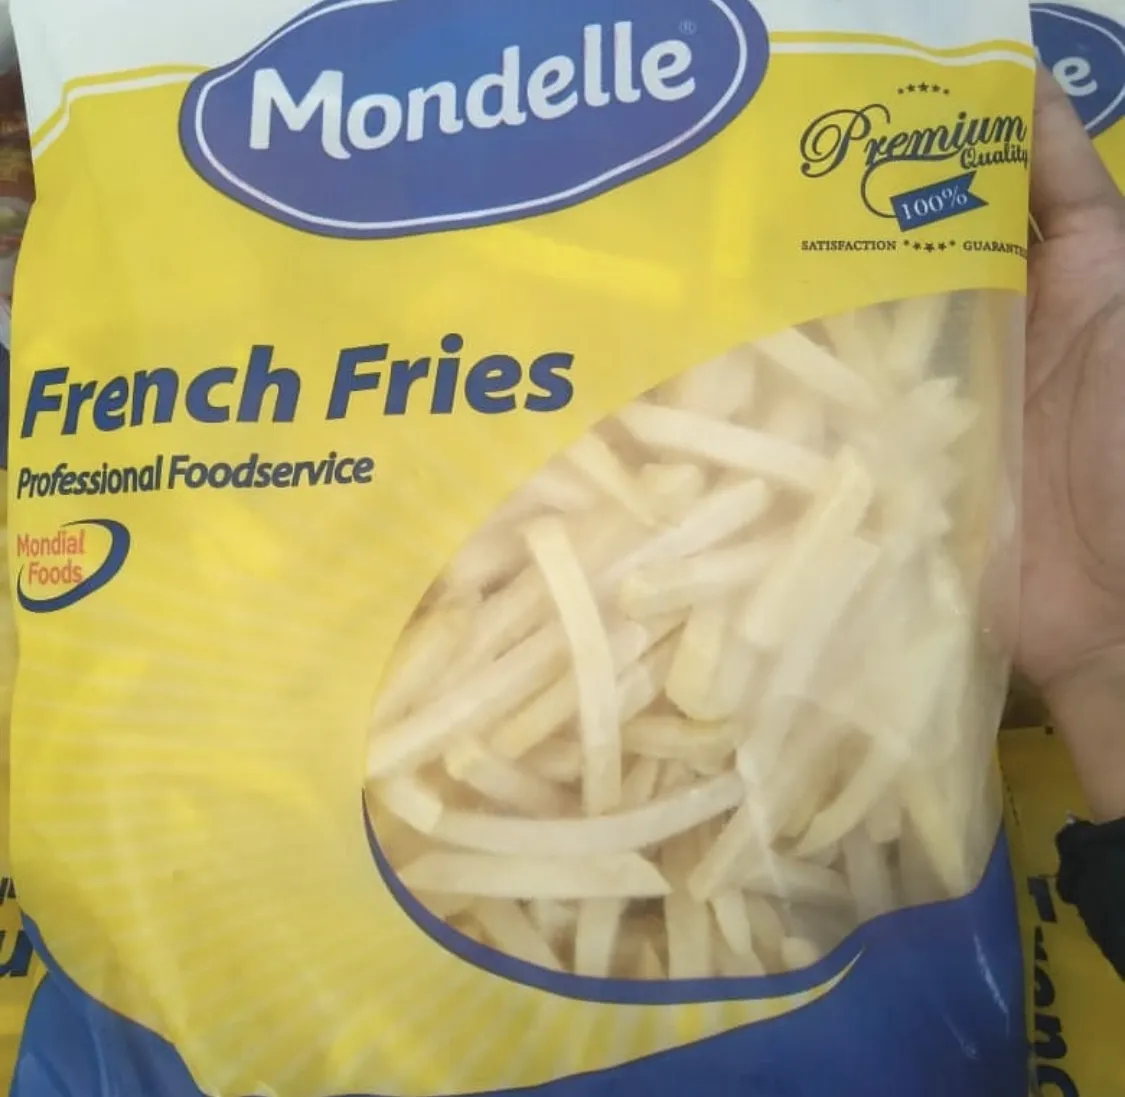 ALL SIZES FROZEN FRENCH FRIES